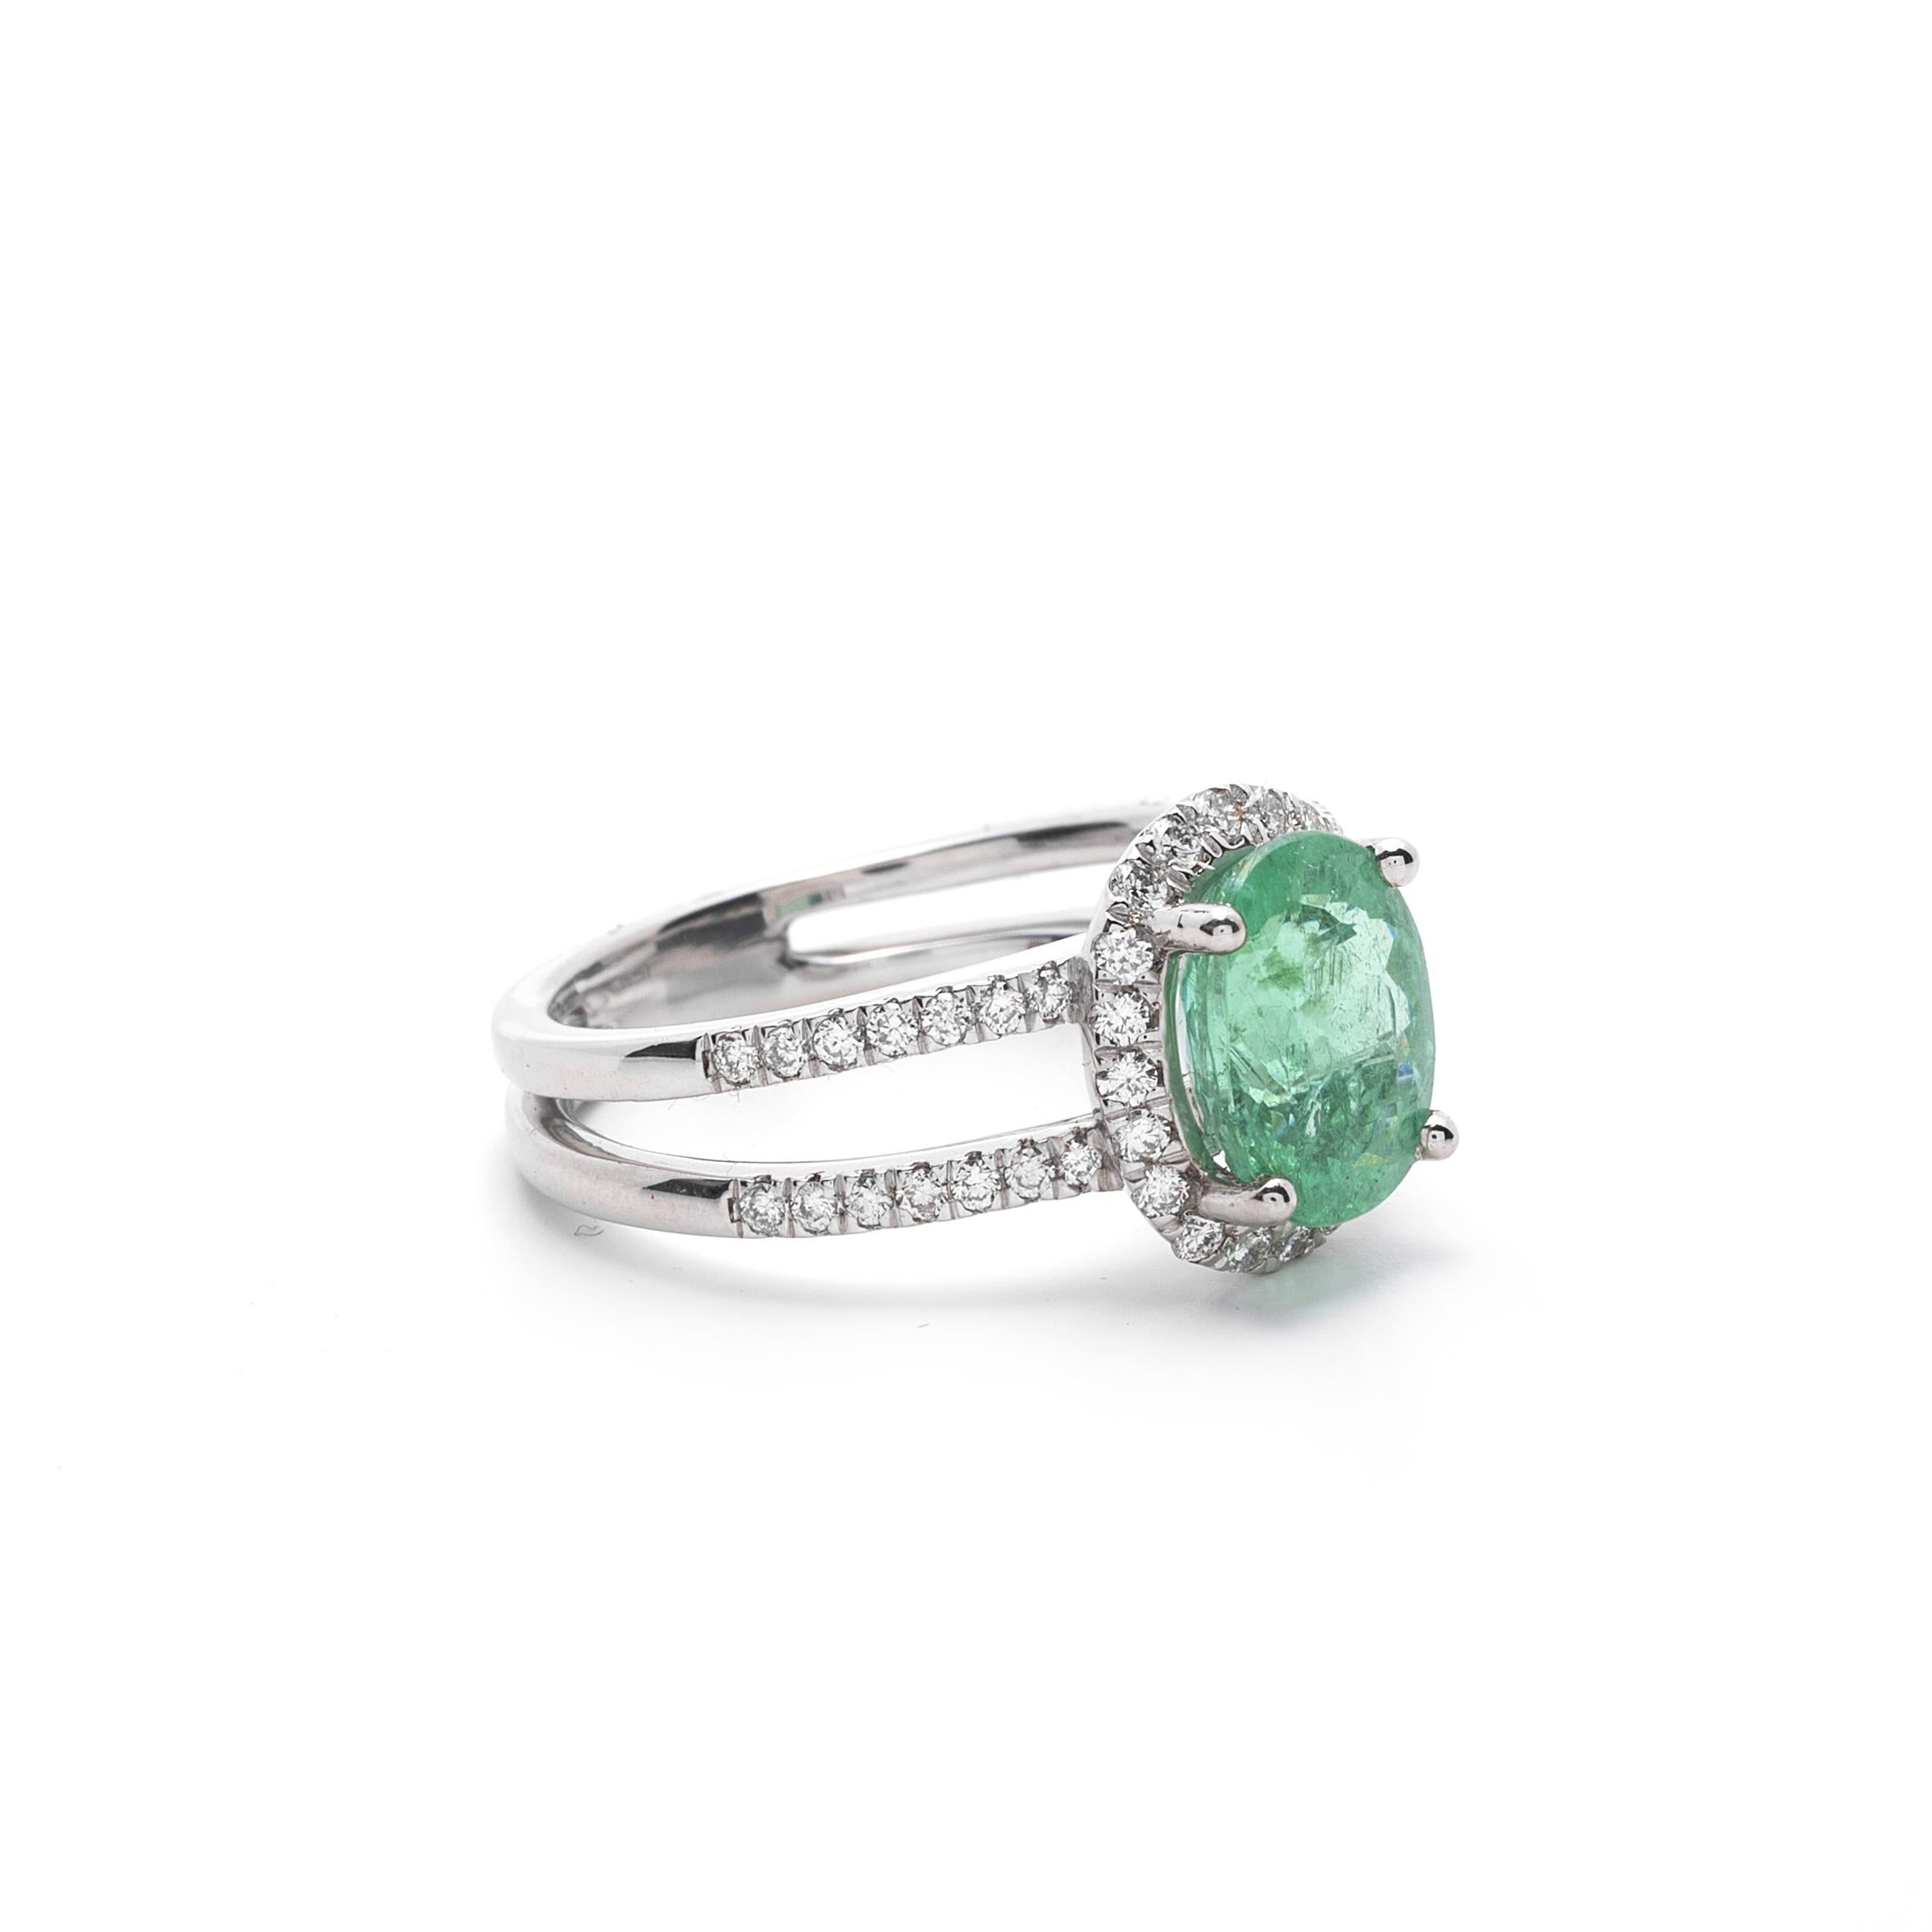 
Paraiba Tourmaline and Diamond Ring
Tourmaline weighing 1.94 ct
diamonds weighing approx. .36 cts
mounted in Platinum
size 6 1/4
7.60 grams (gross)
accompanied with AIG paperwork stating:
One prong set oval mixed cut natural paraiba toumaline,